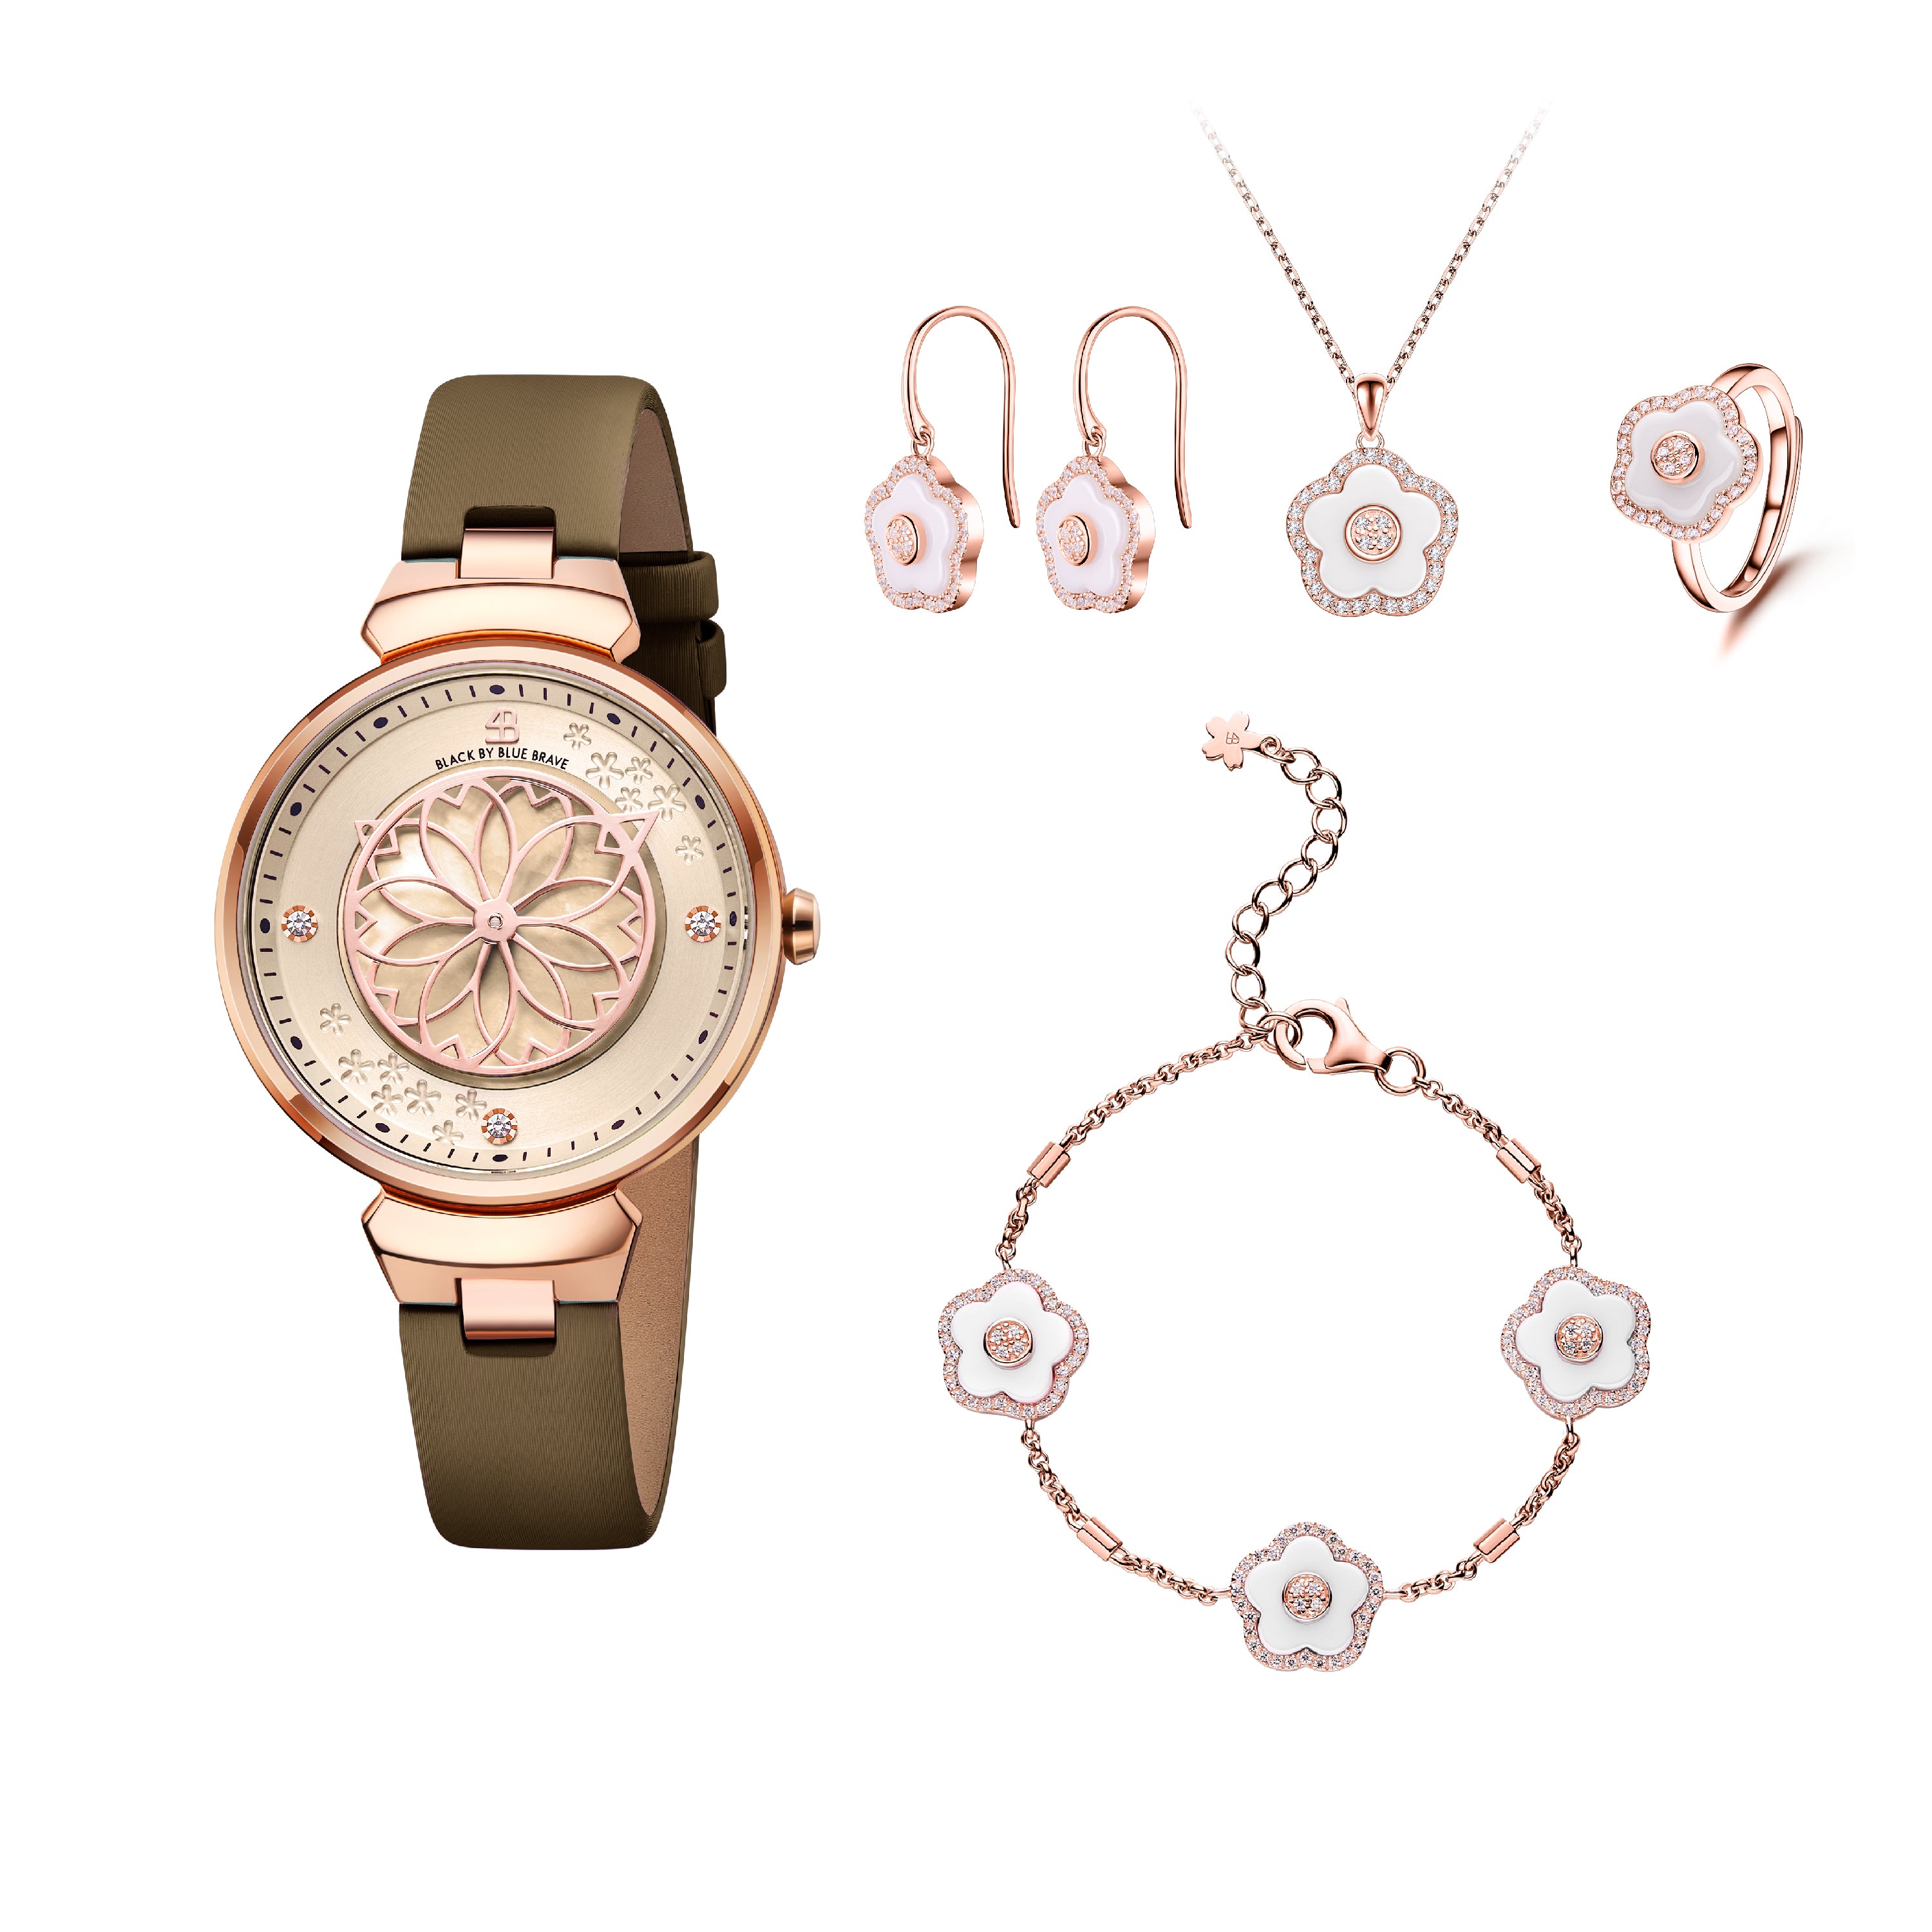 Blue Cherry Blossom Watch With Flower Ceramic  Jewelleries（Earrings & Bracelet & Necklace & Ring）